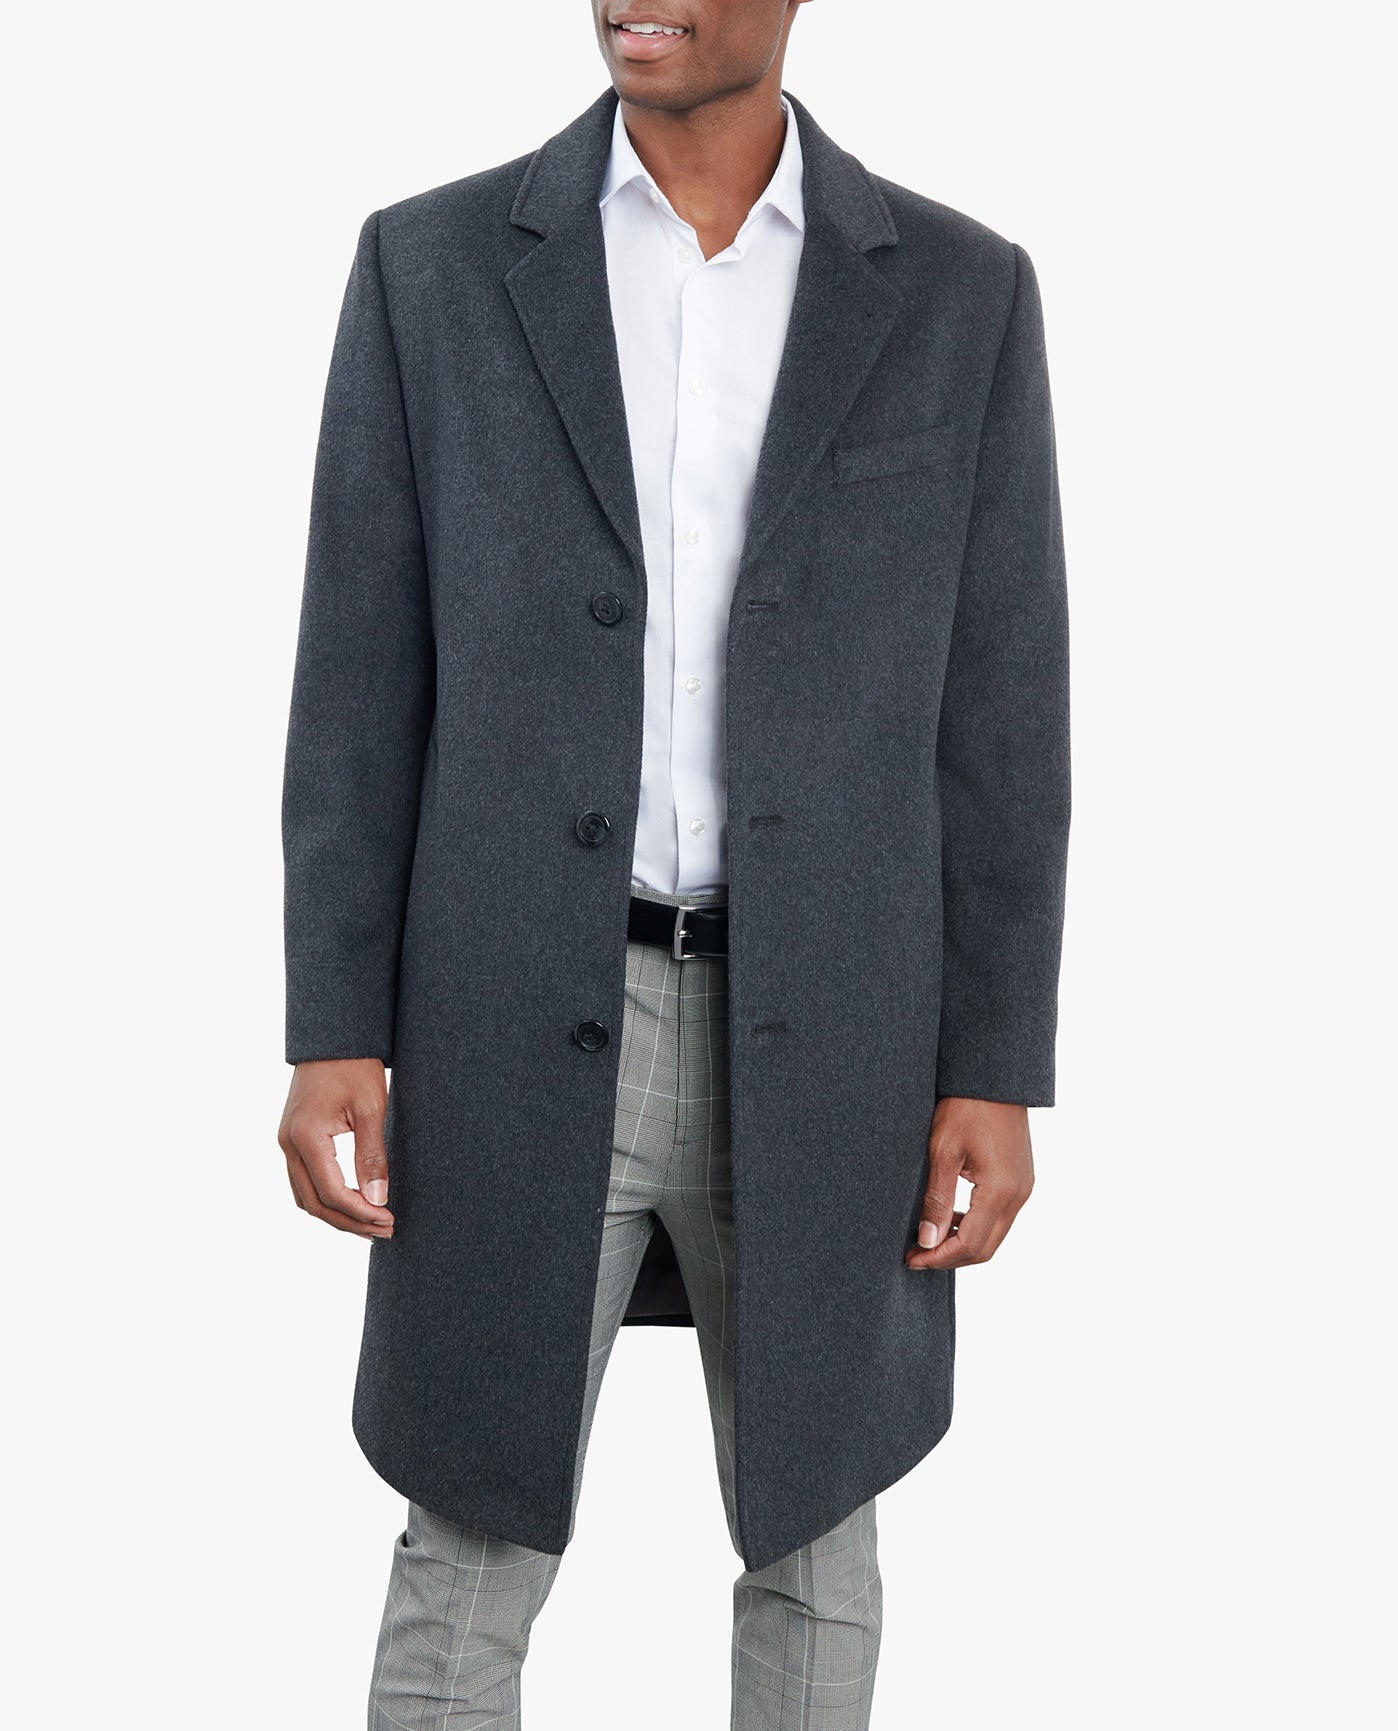 FRONT VIEW OF SIGNATURE 42" SINGLE BREASTED WOOL JACKET | CHARCOAL